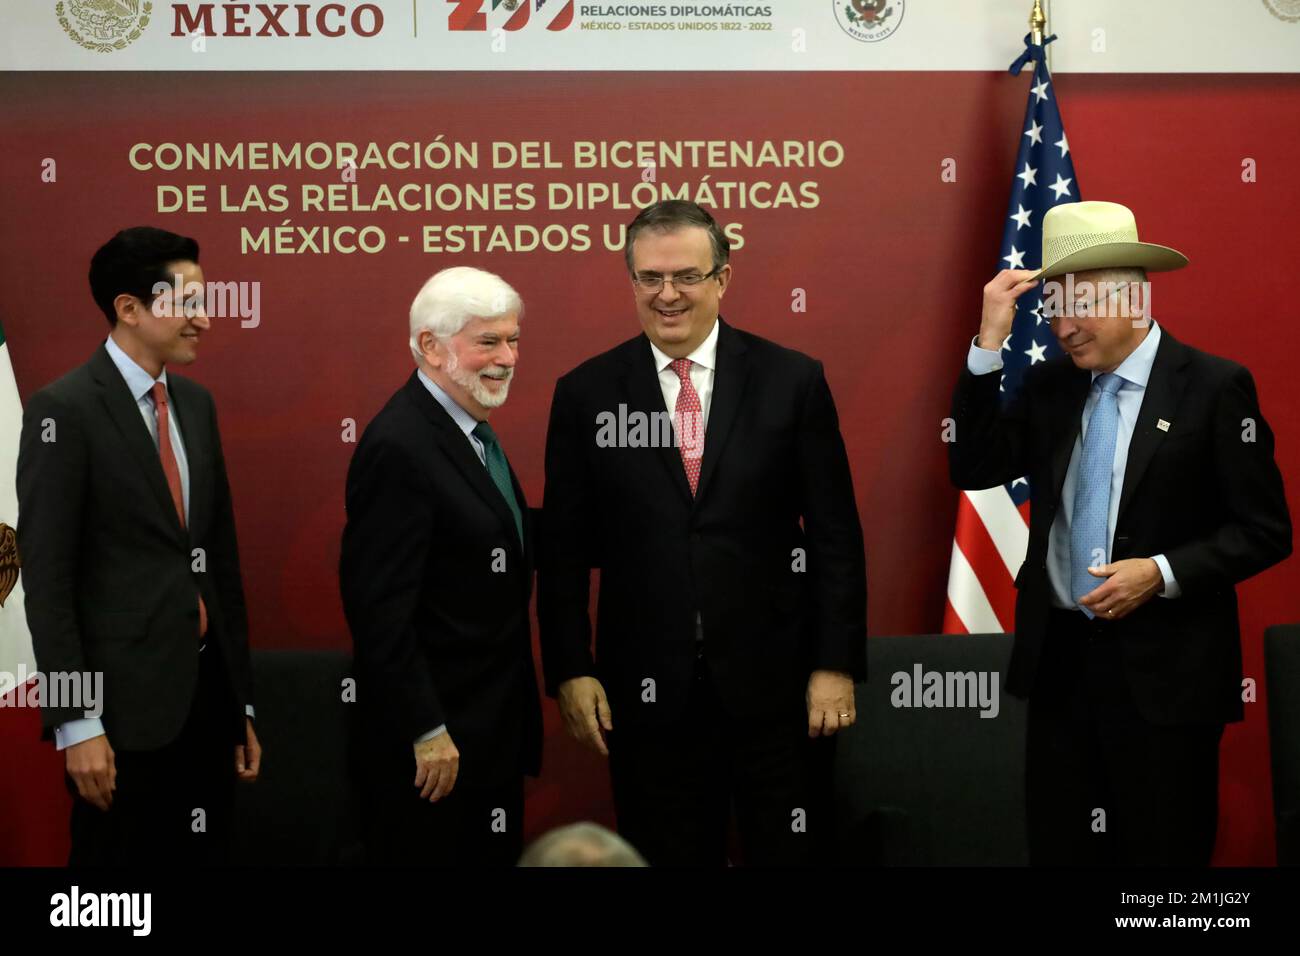 December 12, 2022, Mexico City, Mexico: The Foreign Minister of Mexico, Marcelo Ebrard Casaubon; Chris Dodd, Presidential Adviser to the United States Government for the Americas; the US ambassador to Mexico, Ken Salazar and Roberto Velasco, head of the Unit for North America of the Mexican Foreign Ministry at the signing ceremony of the Declaration of Friendship for the bicentennial of their diplomatic relations at the headquarters of the Ministry of Relations Exteriors in Mexico City. on December 12, 2022 in Mexico City, Mexico. (Photo by Luis Barron / Eyepix Group). Stock Photo